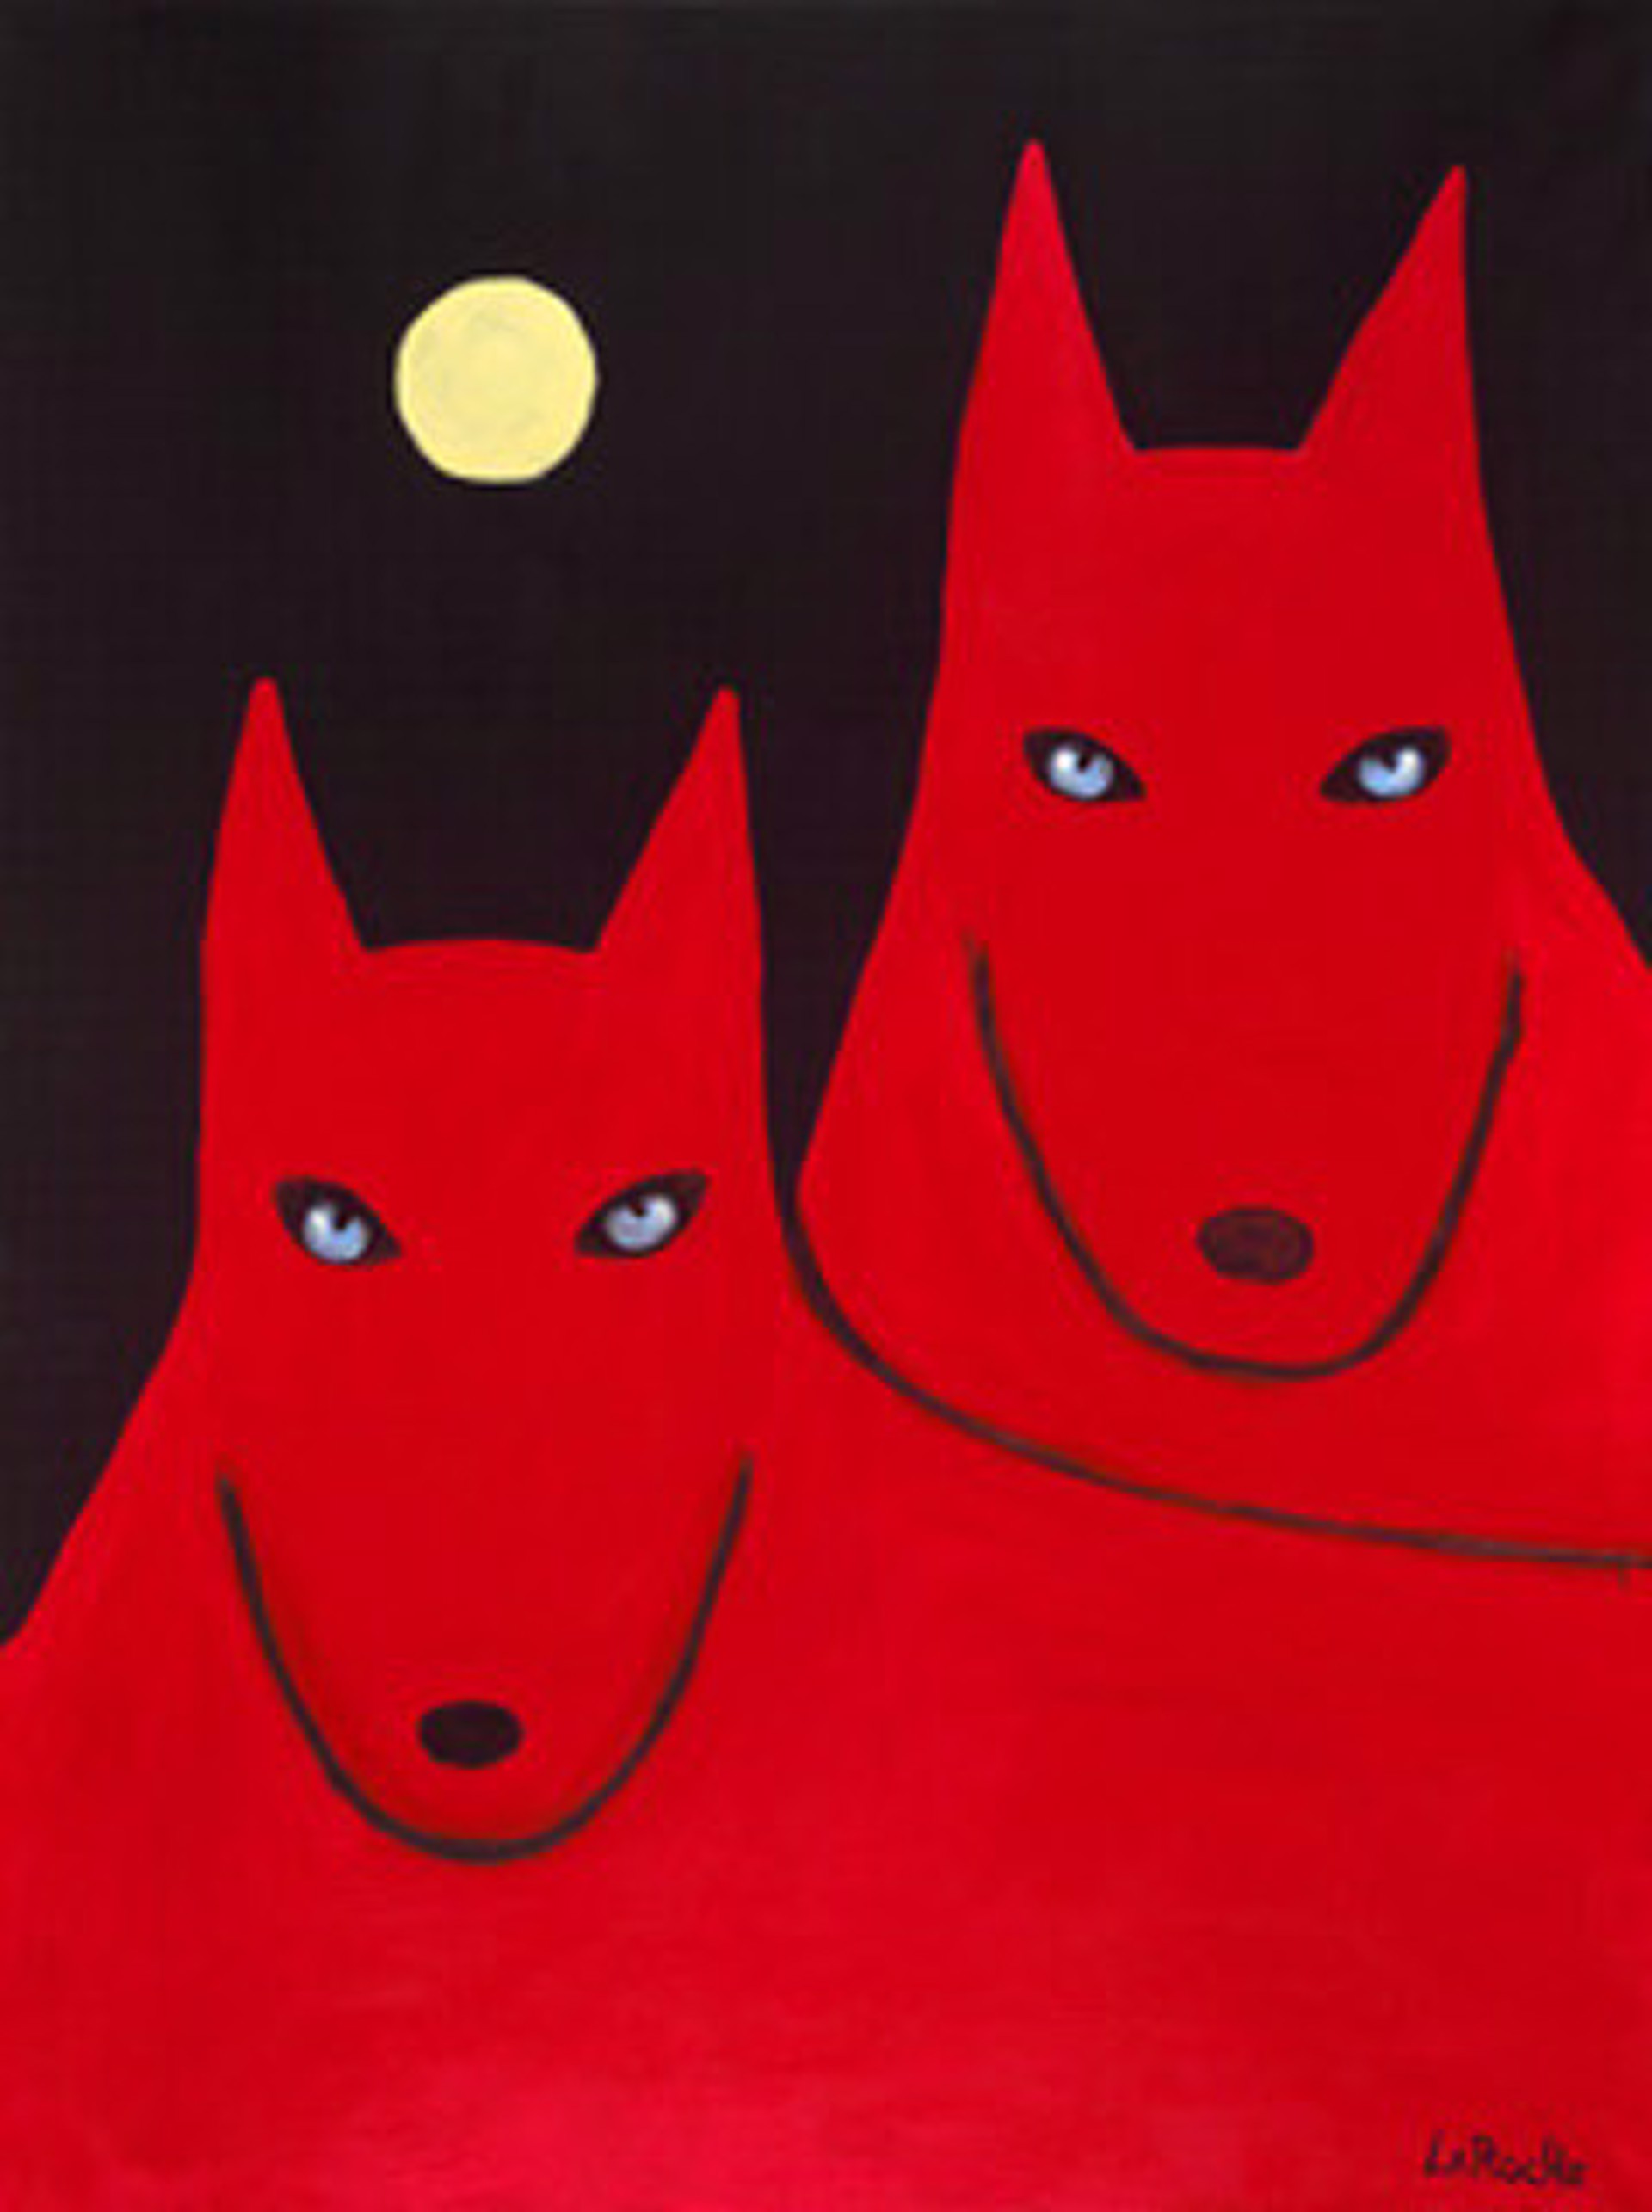 Red Soulmates by Moonlight, Giclee Print on Canvas 48x36in $3950